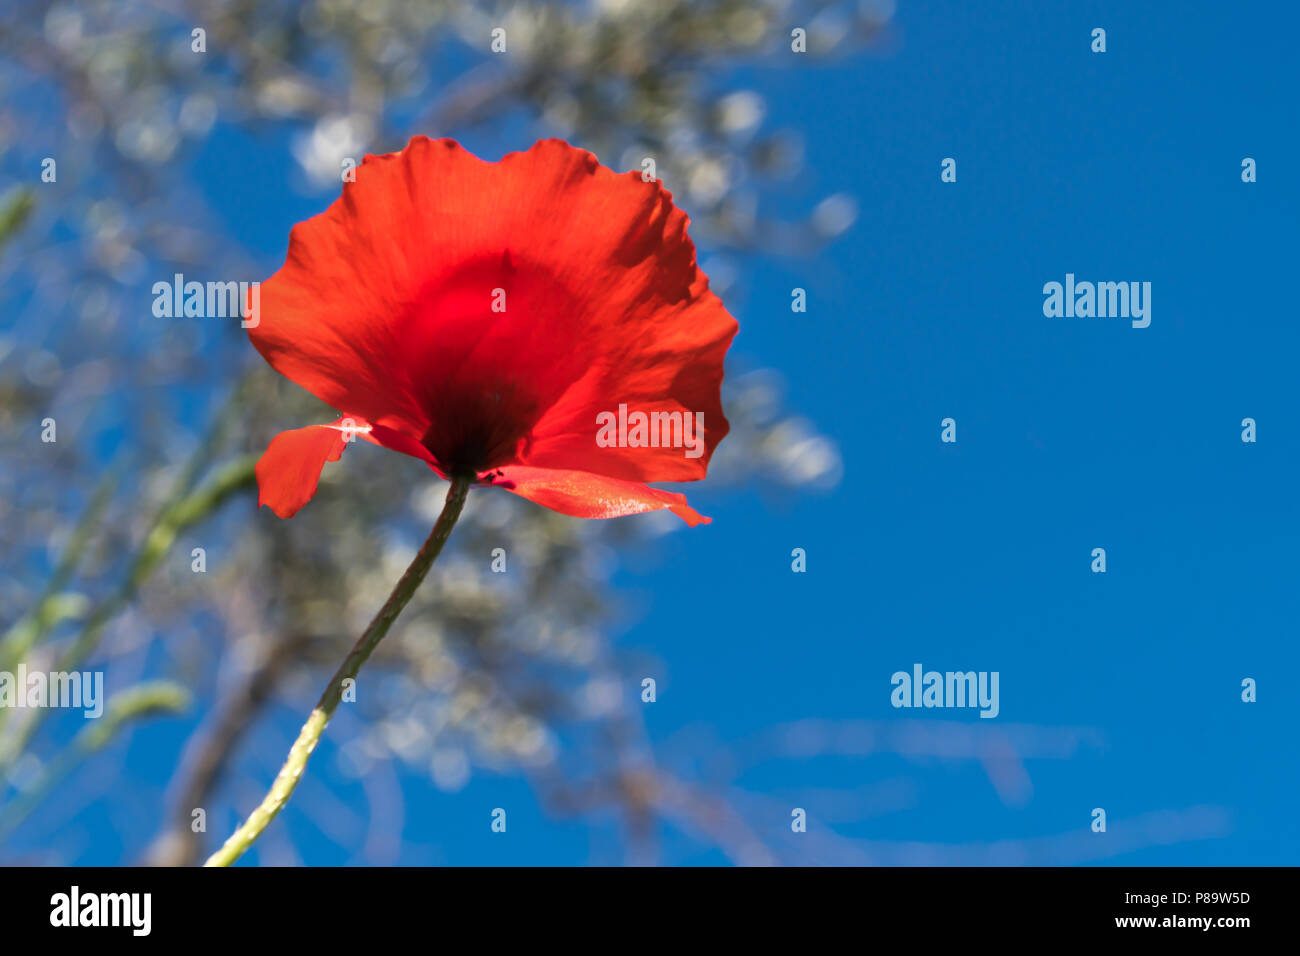 Deep Blue Sky with a single Red Poppy Flower, Tight Stock Photo